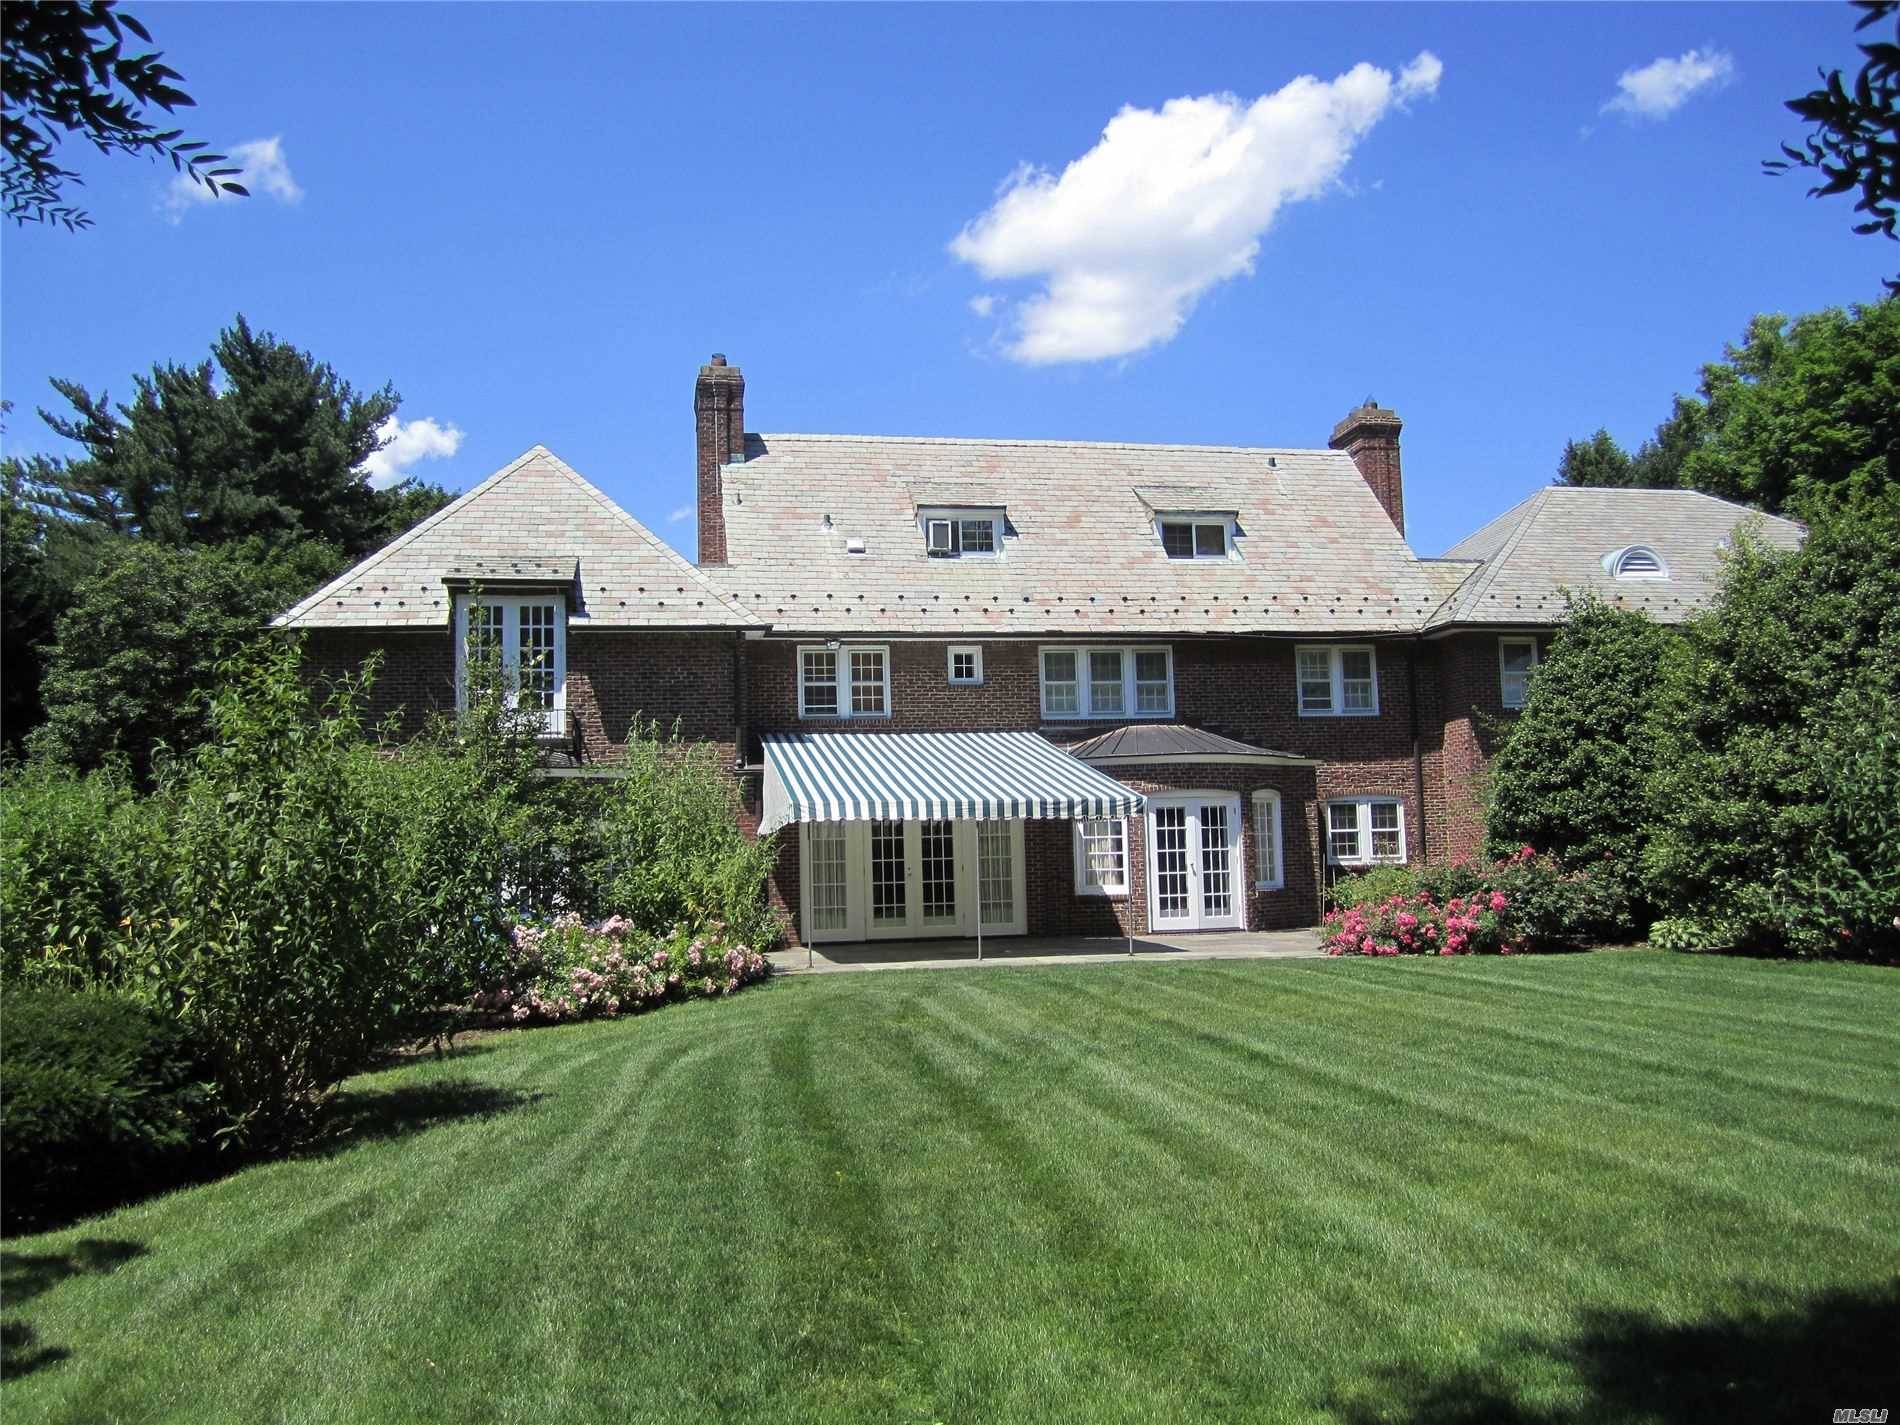 Designed in 1917 by Mott Schmidt this 7 bedroom Estate was originally know as The Farm House.